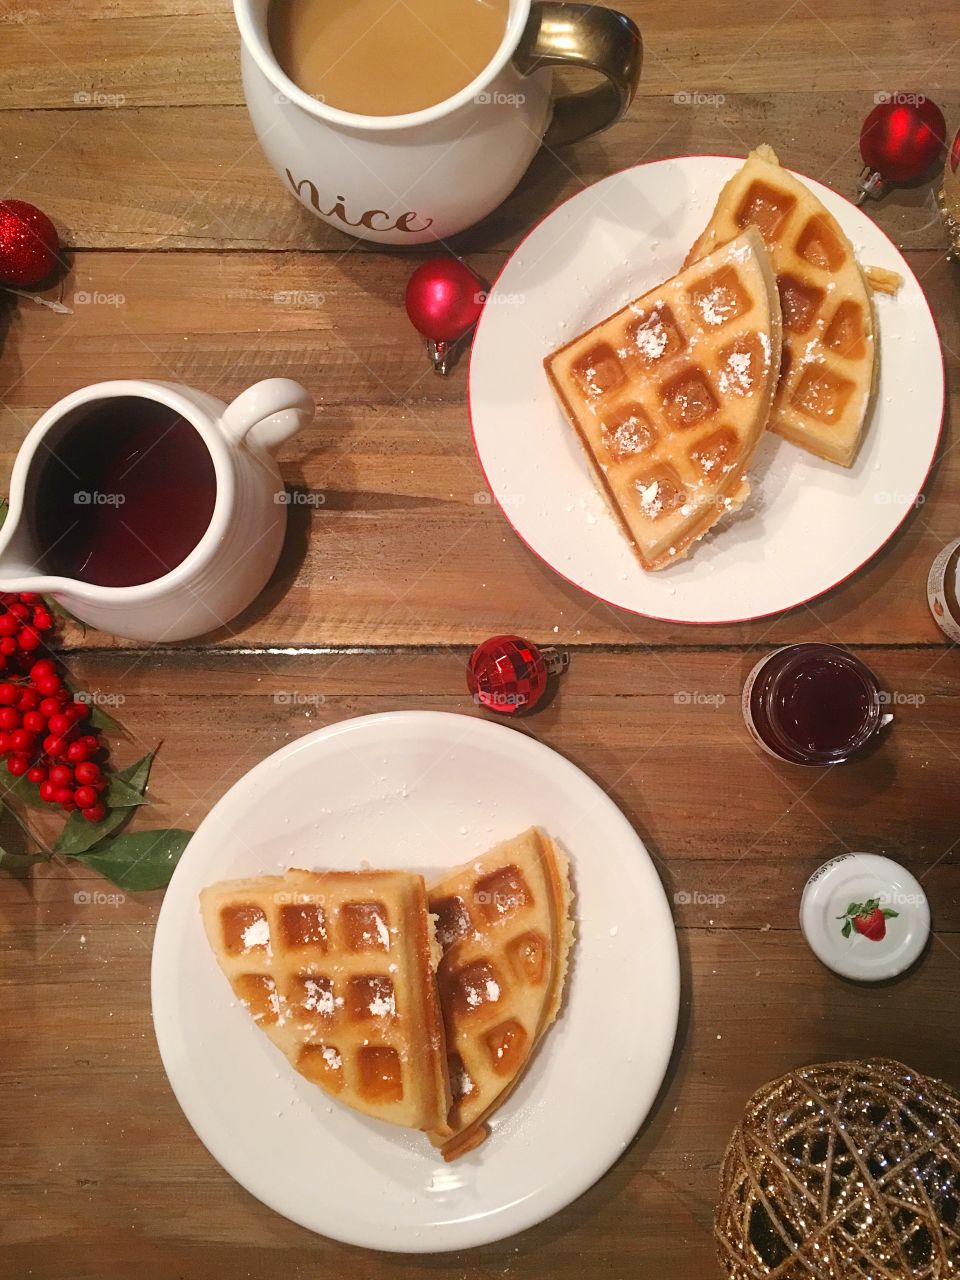 Homemade waffles for breakfast on a perfect holiday morning.